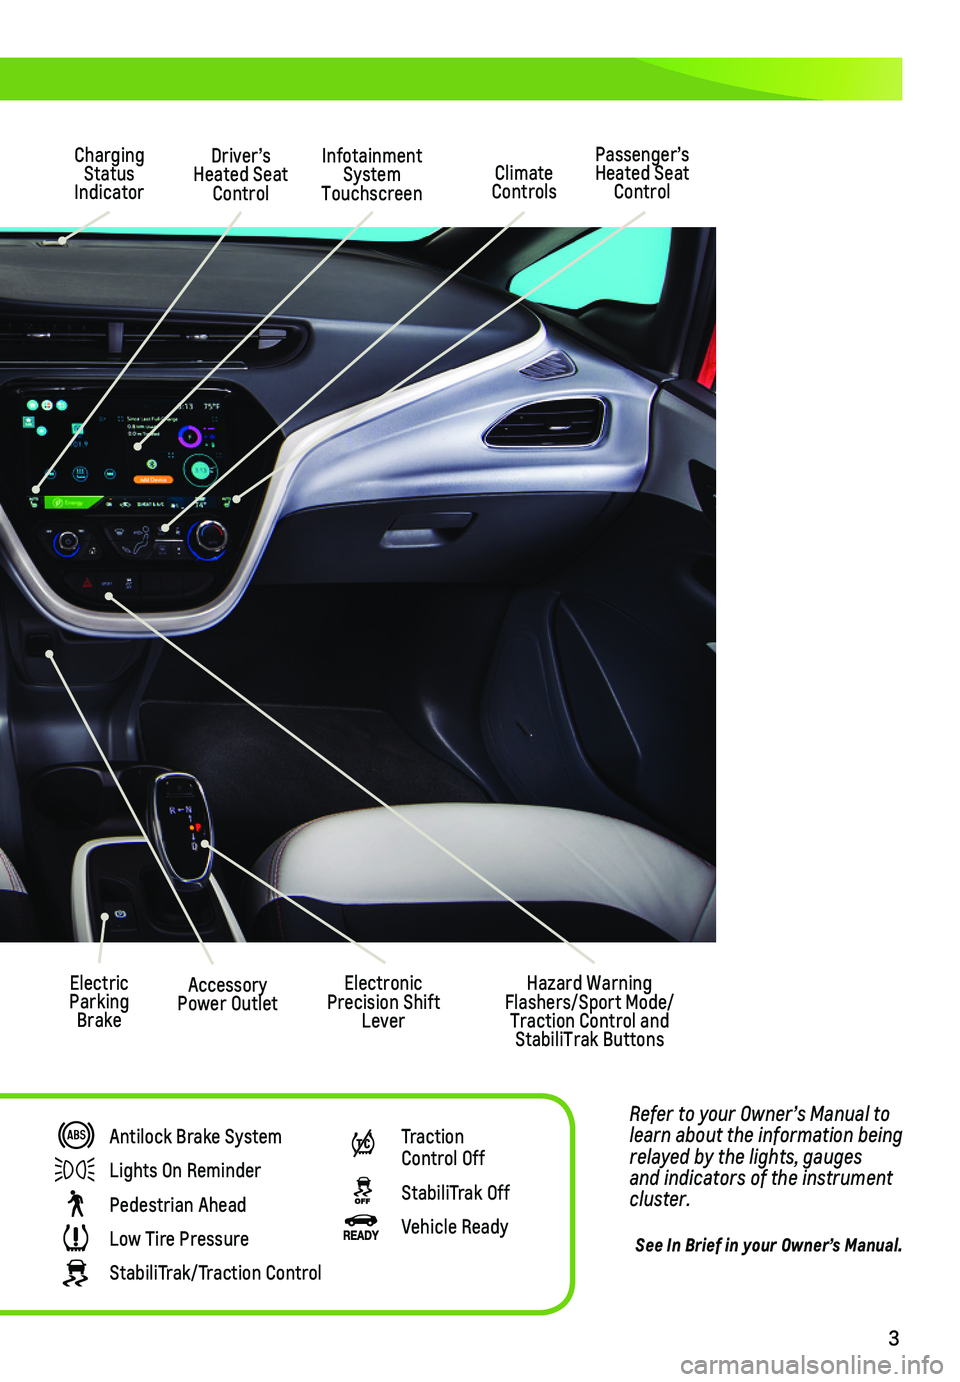 CHEVROLET BOLT EV 2018  Get To Know Guide 3
Refer to your Owner’s Manual to learn about the information being relayed by the lights, gauges and indicators of the instrument cluster.
See In Brief in your Owner’s Manual.
Driver’s Heated S